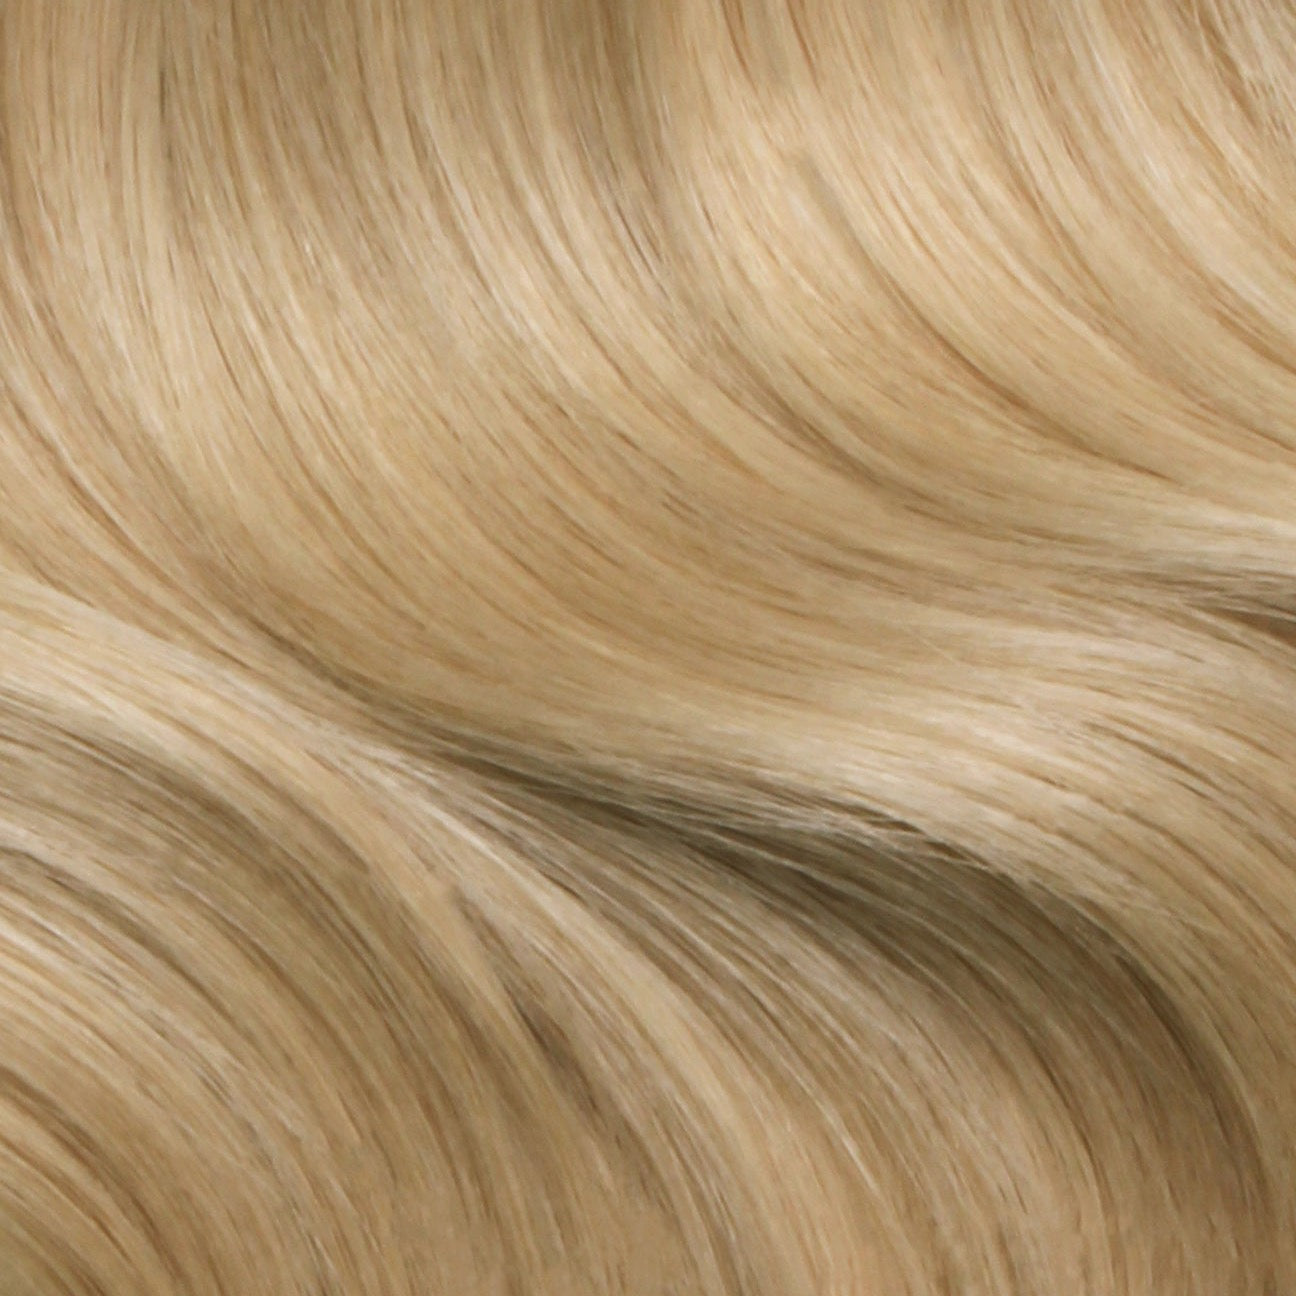 Nano Bonds 20 Inches - SWAY Hair Extensions Beach-Ash-Blonde-9-613 Ultra-fine, invisible bonds for a flawless, natural look. 100% Remy Human hair, lightweight and versatile. Reusable and perfect for individual or salon use.